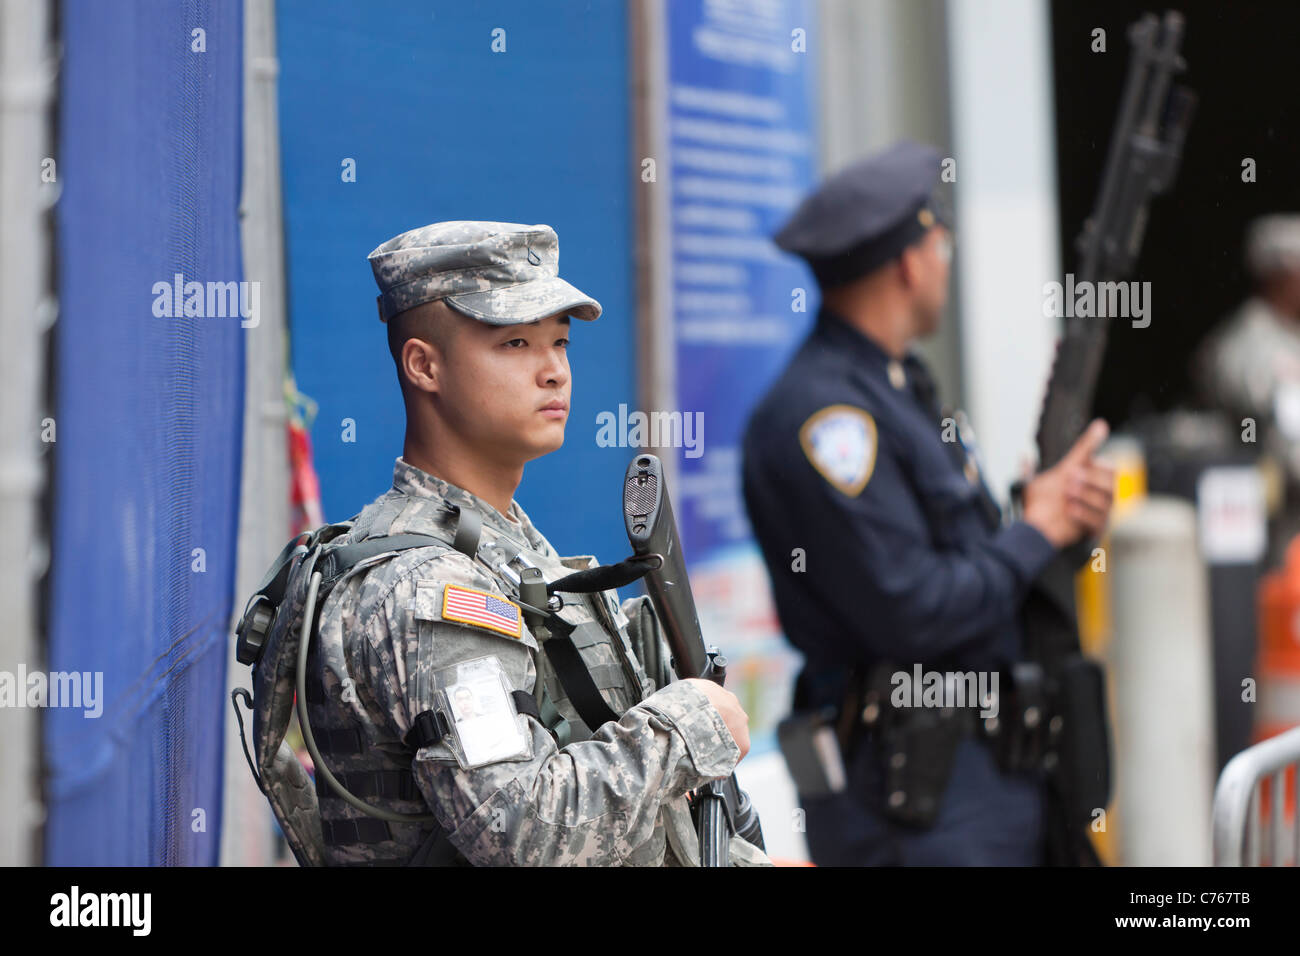 Marines armed with assault rifles provide a security presence at the World Trade Center PATH station with Port Authority Police Stock Photo